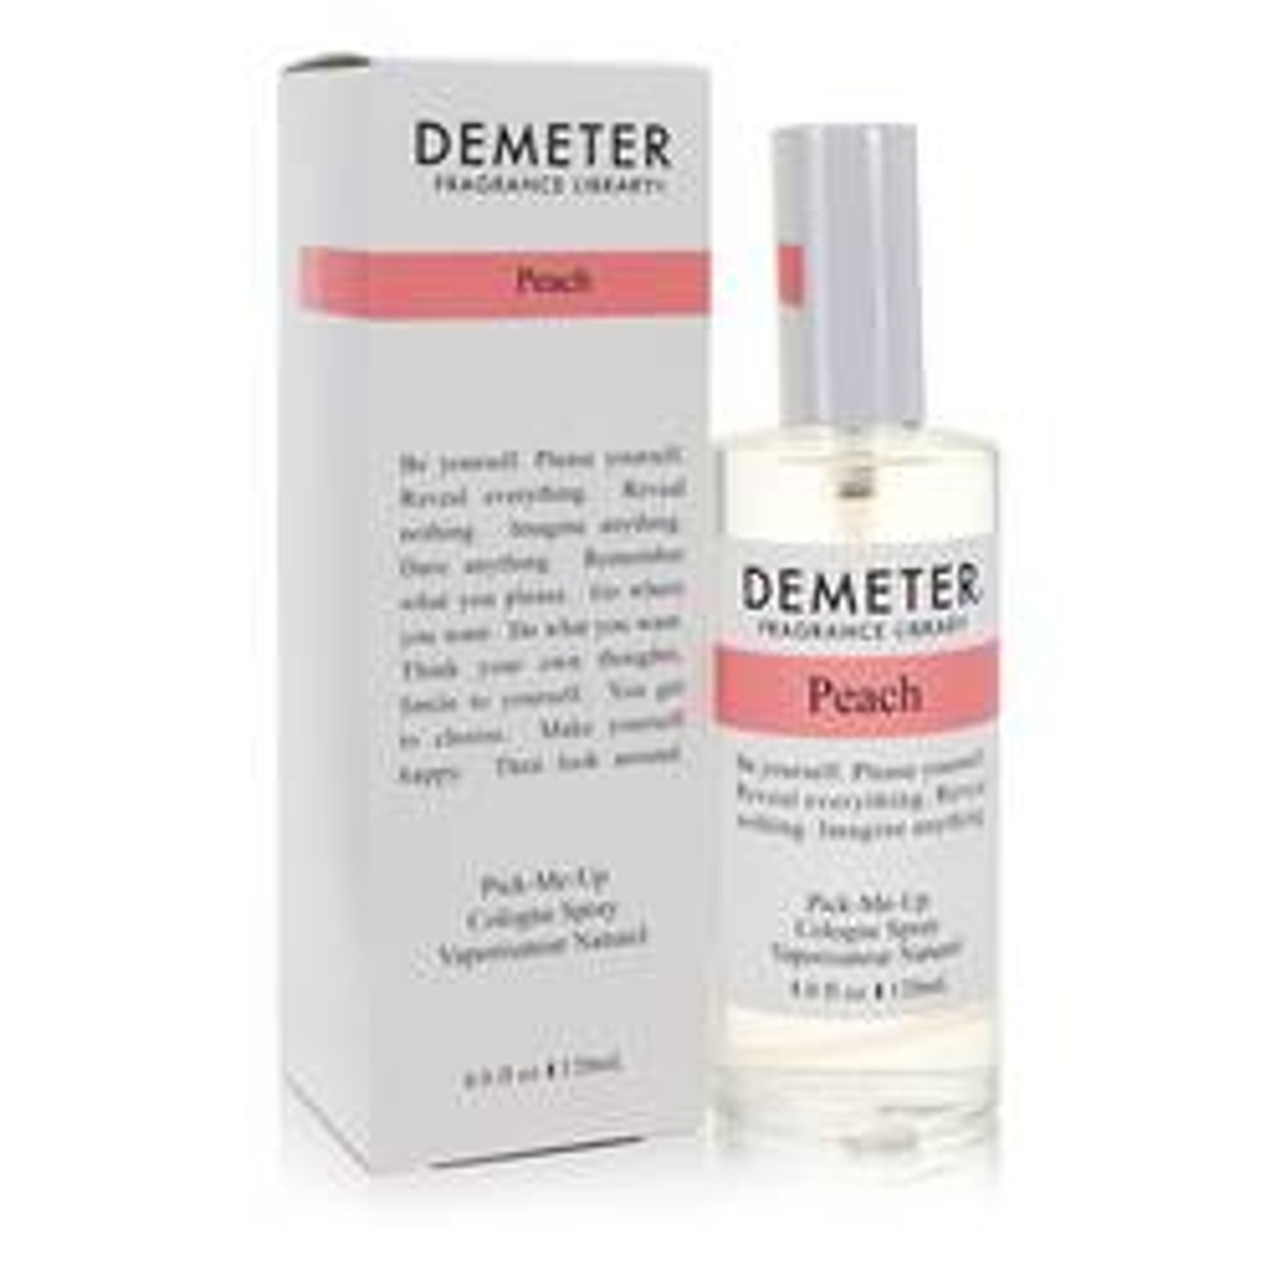 Demeter Peach Perfume By Demeter Cologne Spray 4 oz for Women - [From 79.50 - Choose pk Qty ] - *Ships from Miami